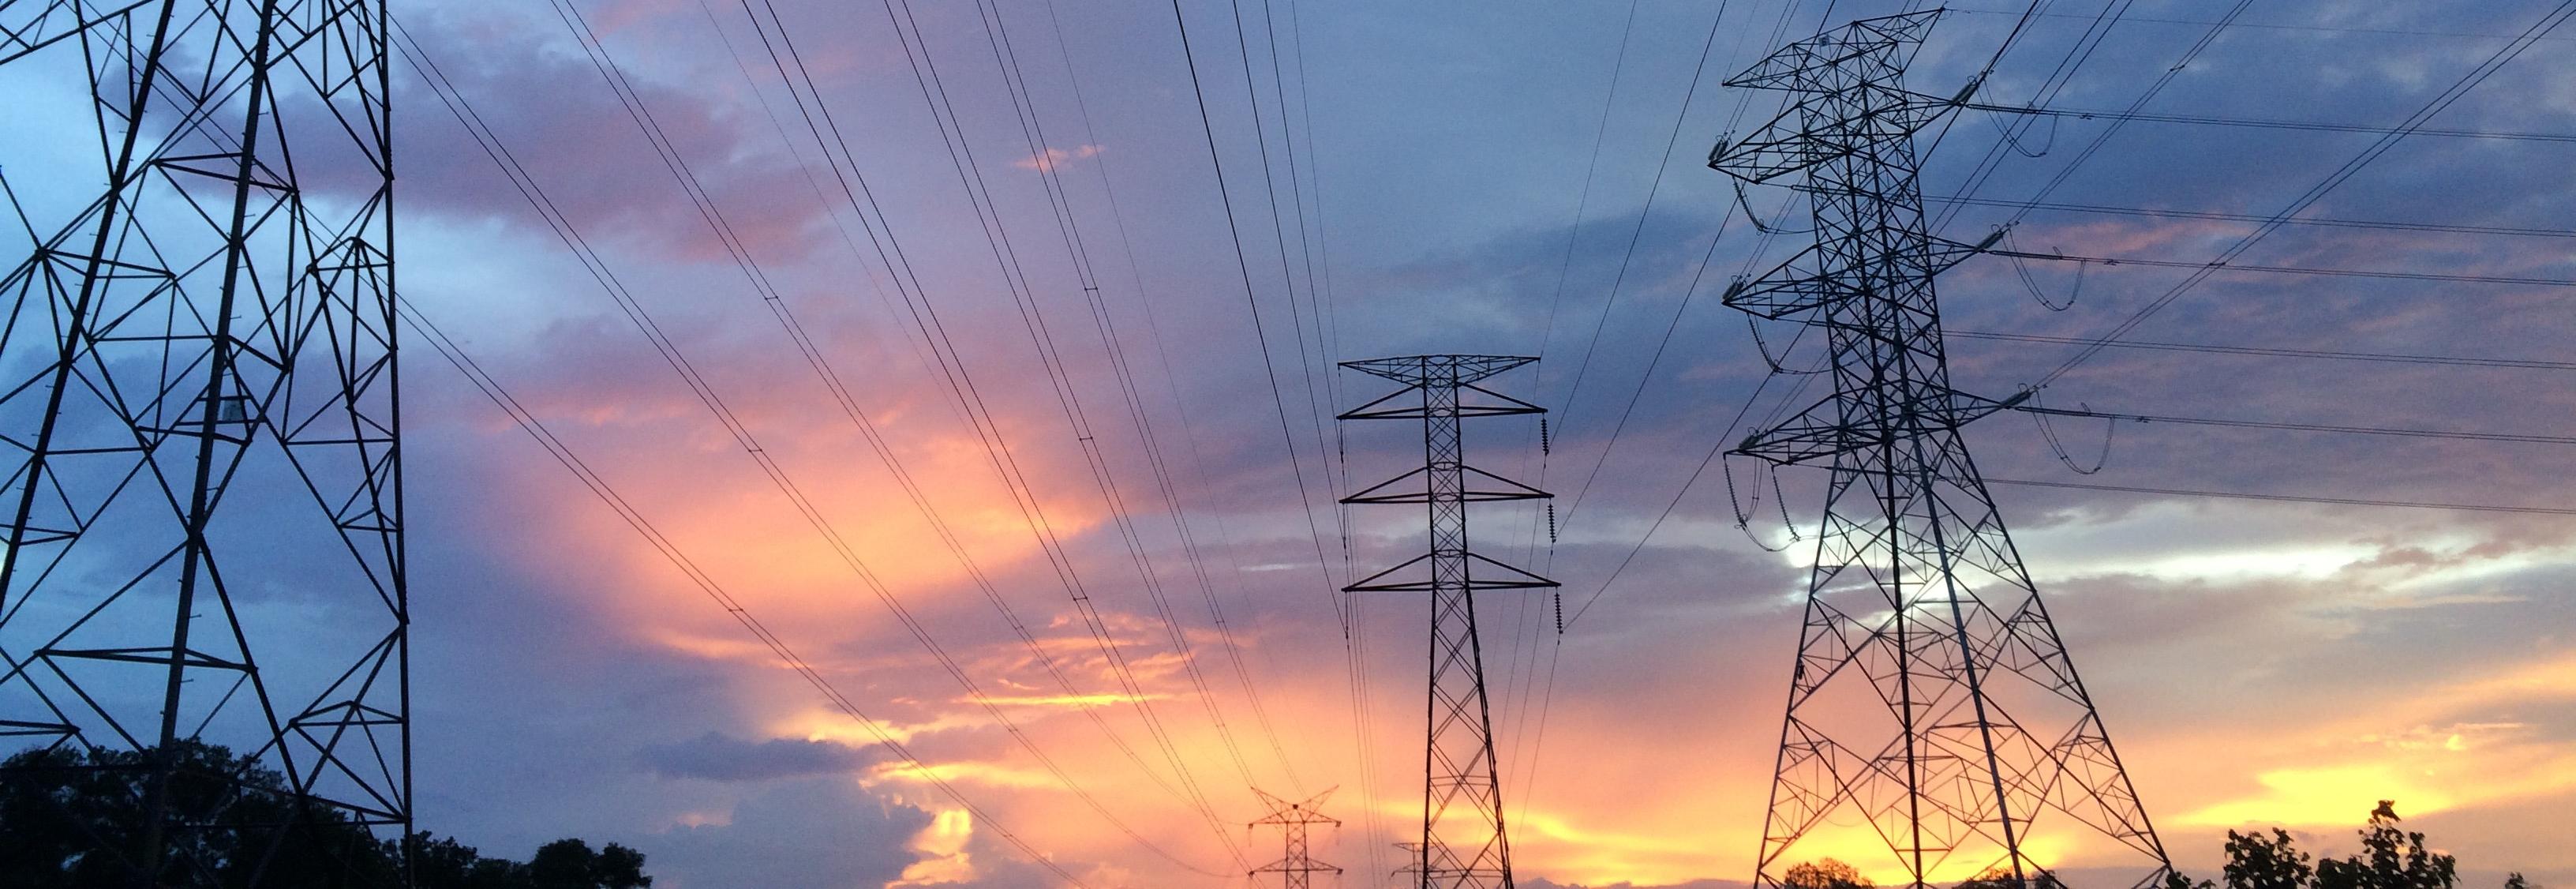 Image of transmission towers against a grey cloudy sky with a yellow sunset at the bottom. Photo by Pok Rie on Pexels